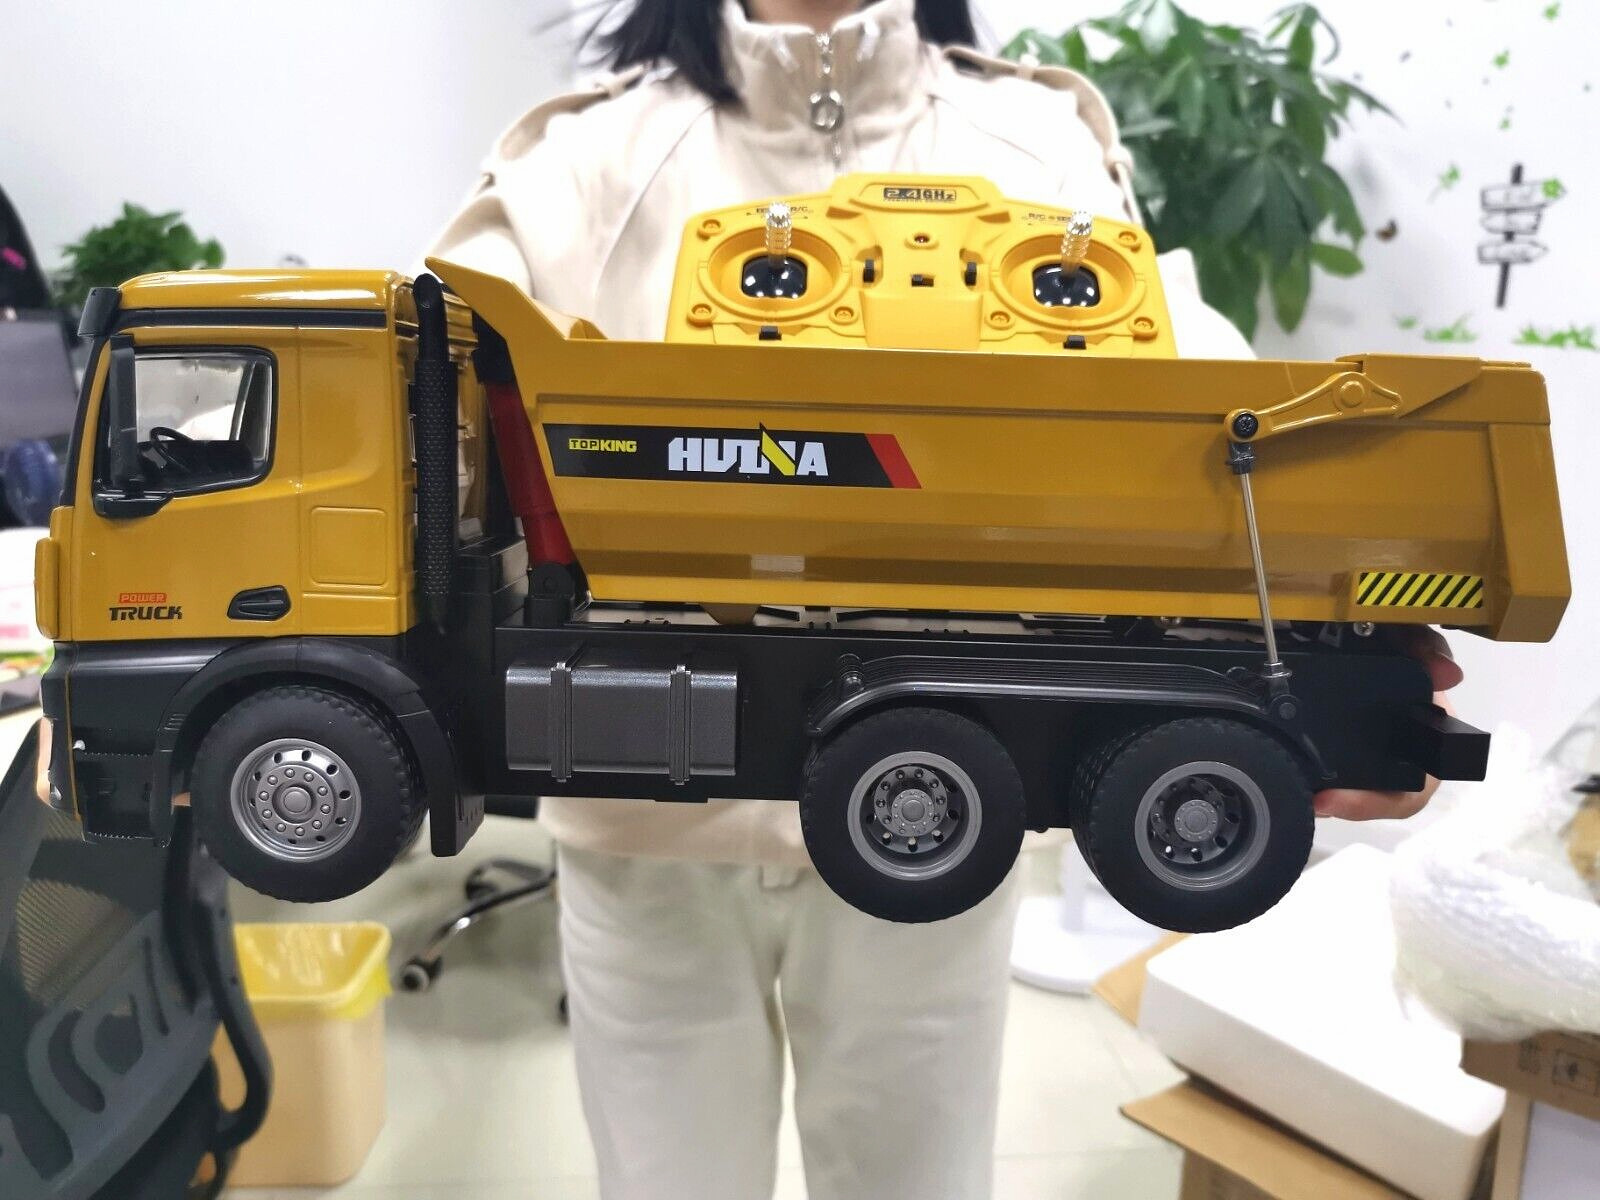 Huina 582 Rc 1:14 Alloy Remote Control Dump Truck Transportation Engineering Toy